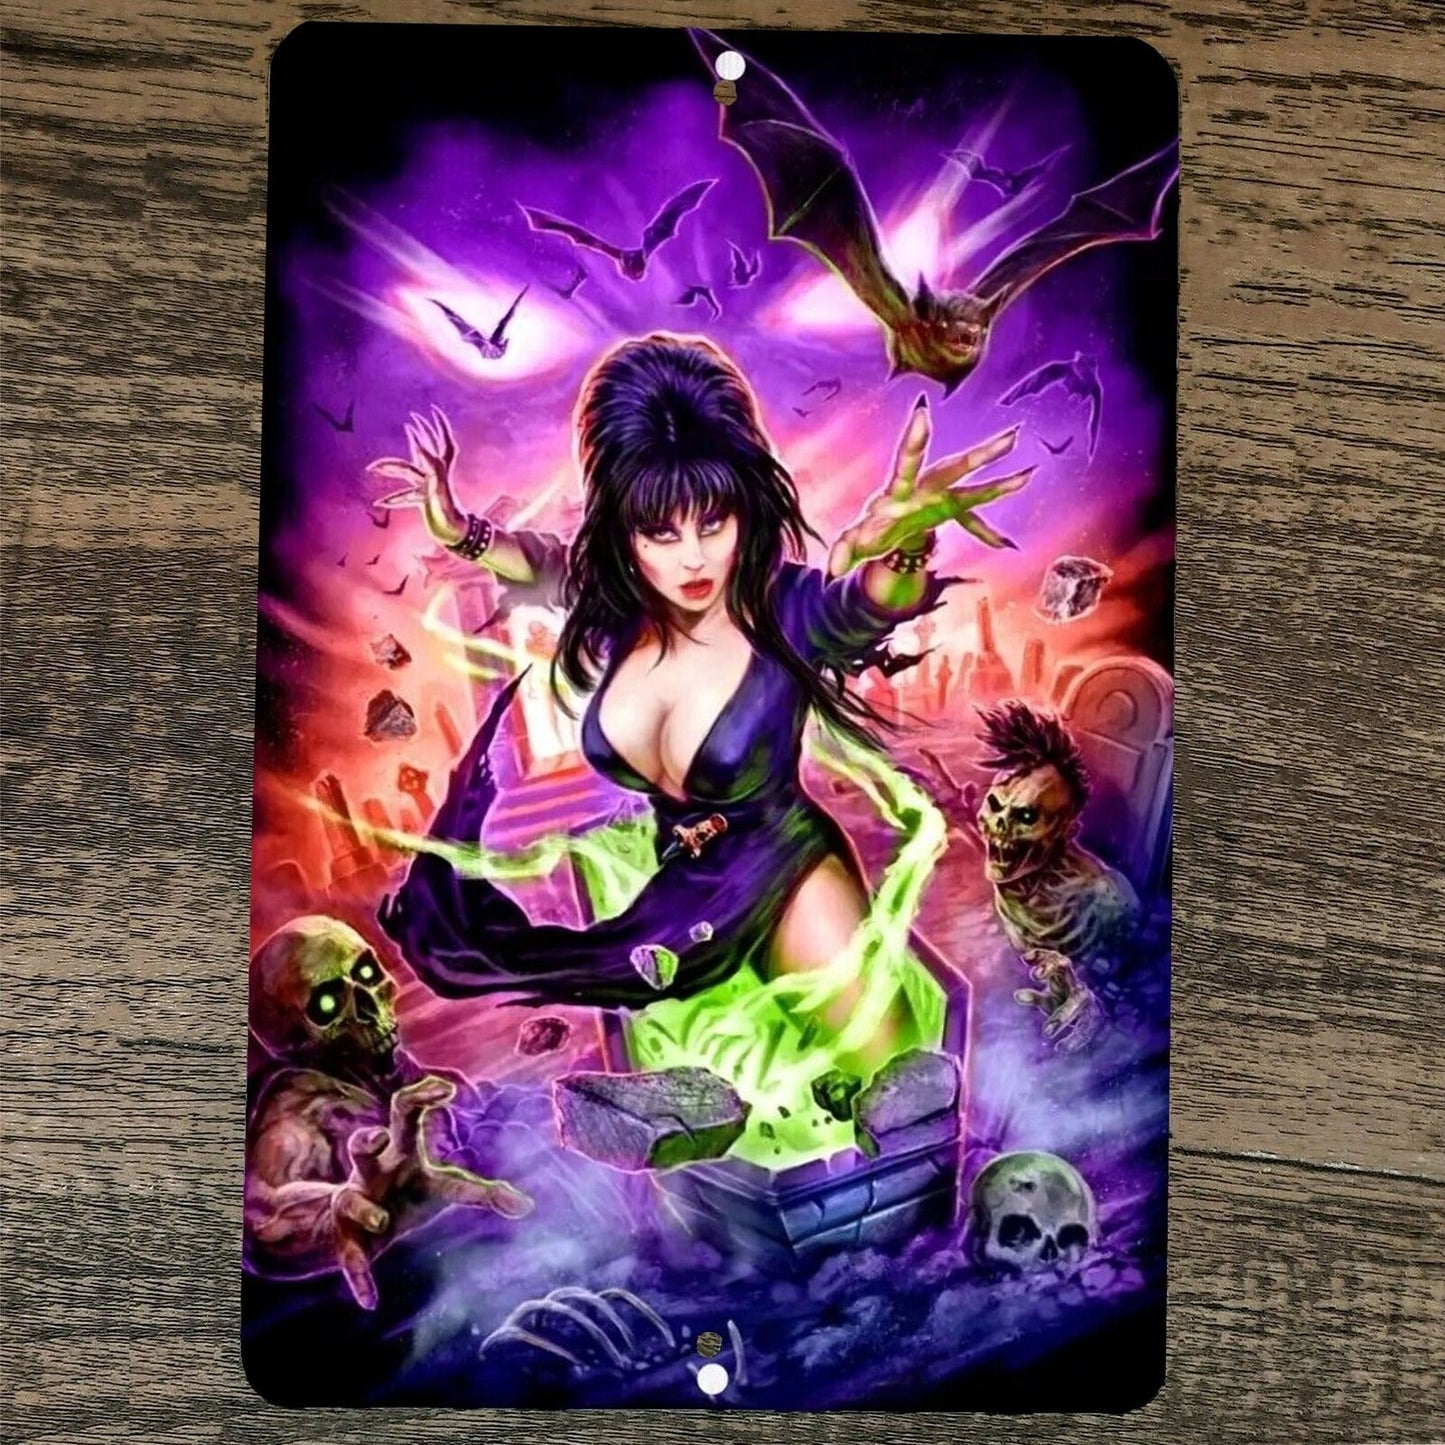 Queen of the Zombies Elvira Mistress of the Dark 8x12 Metal Wall Sign Poster